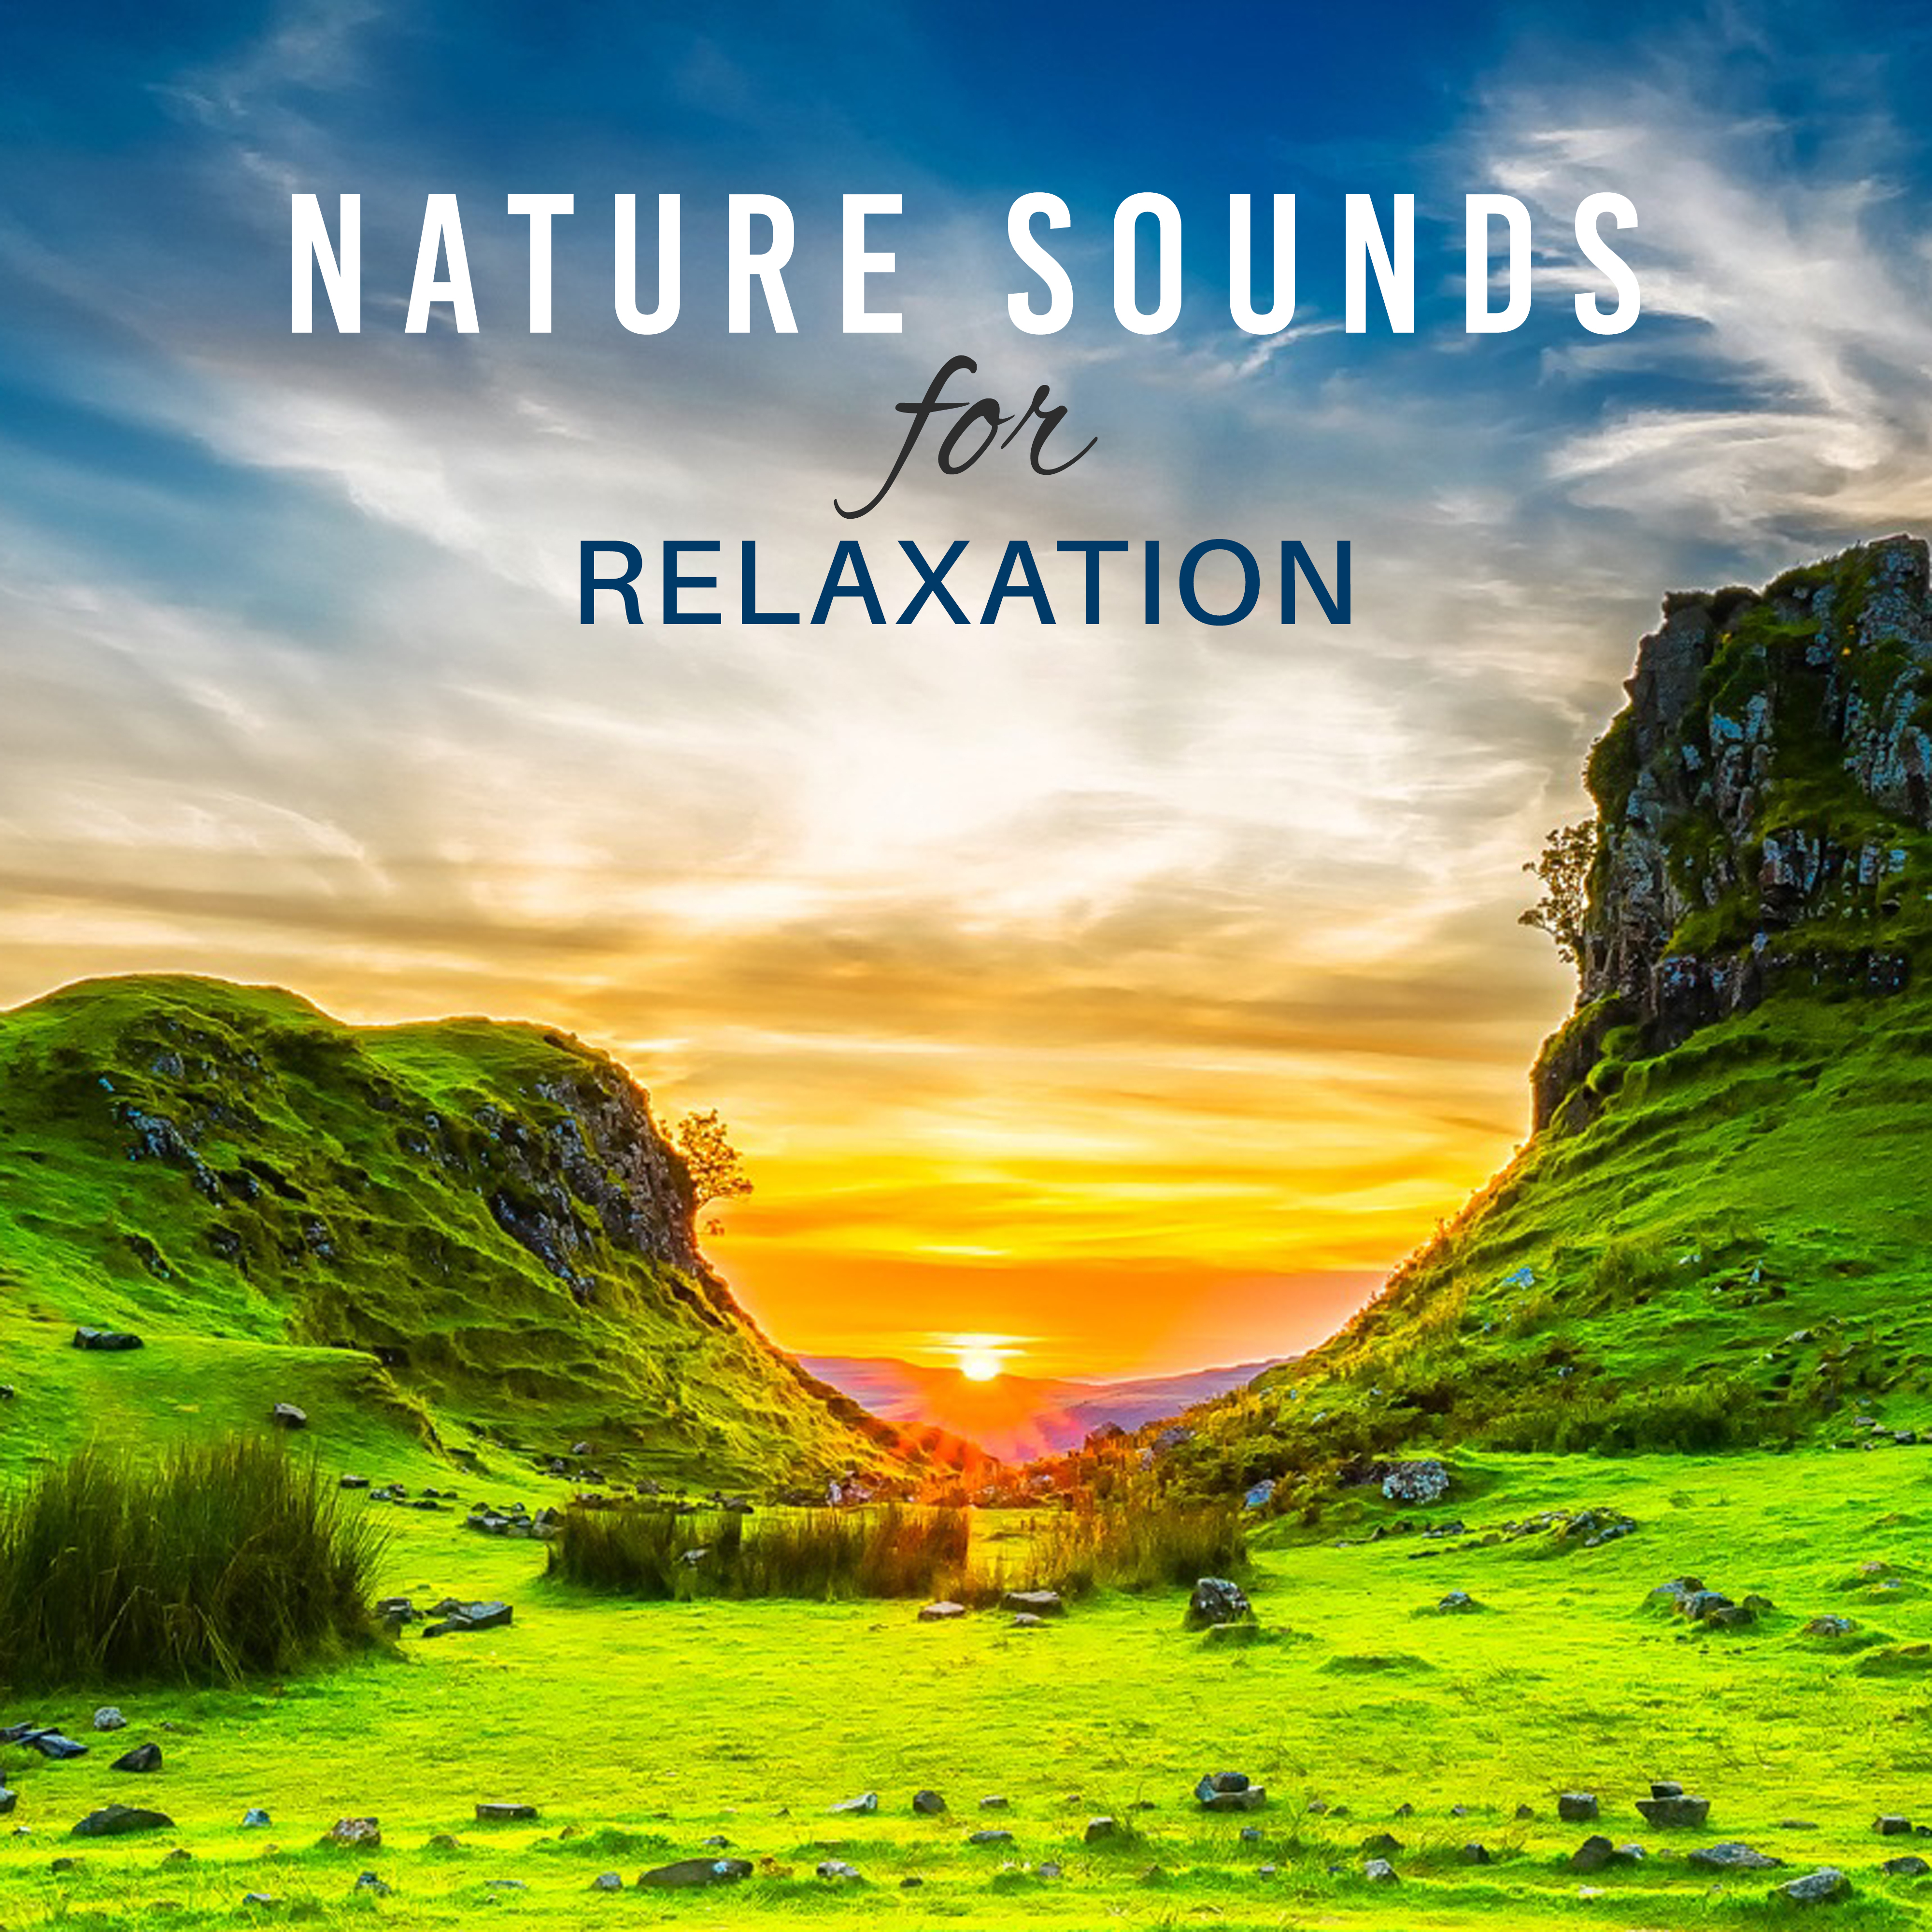 Nature Sounds for Relaxation  Soft Music to Rest, Deep Sleep, Pure Mind, Relax, Meditation, Soothing Rain, Gentle Wind